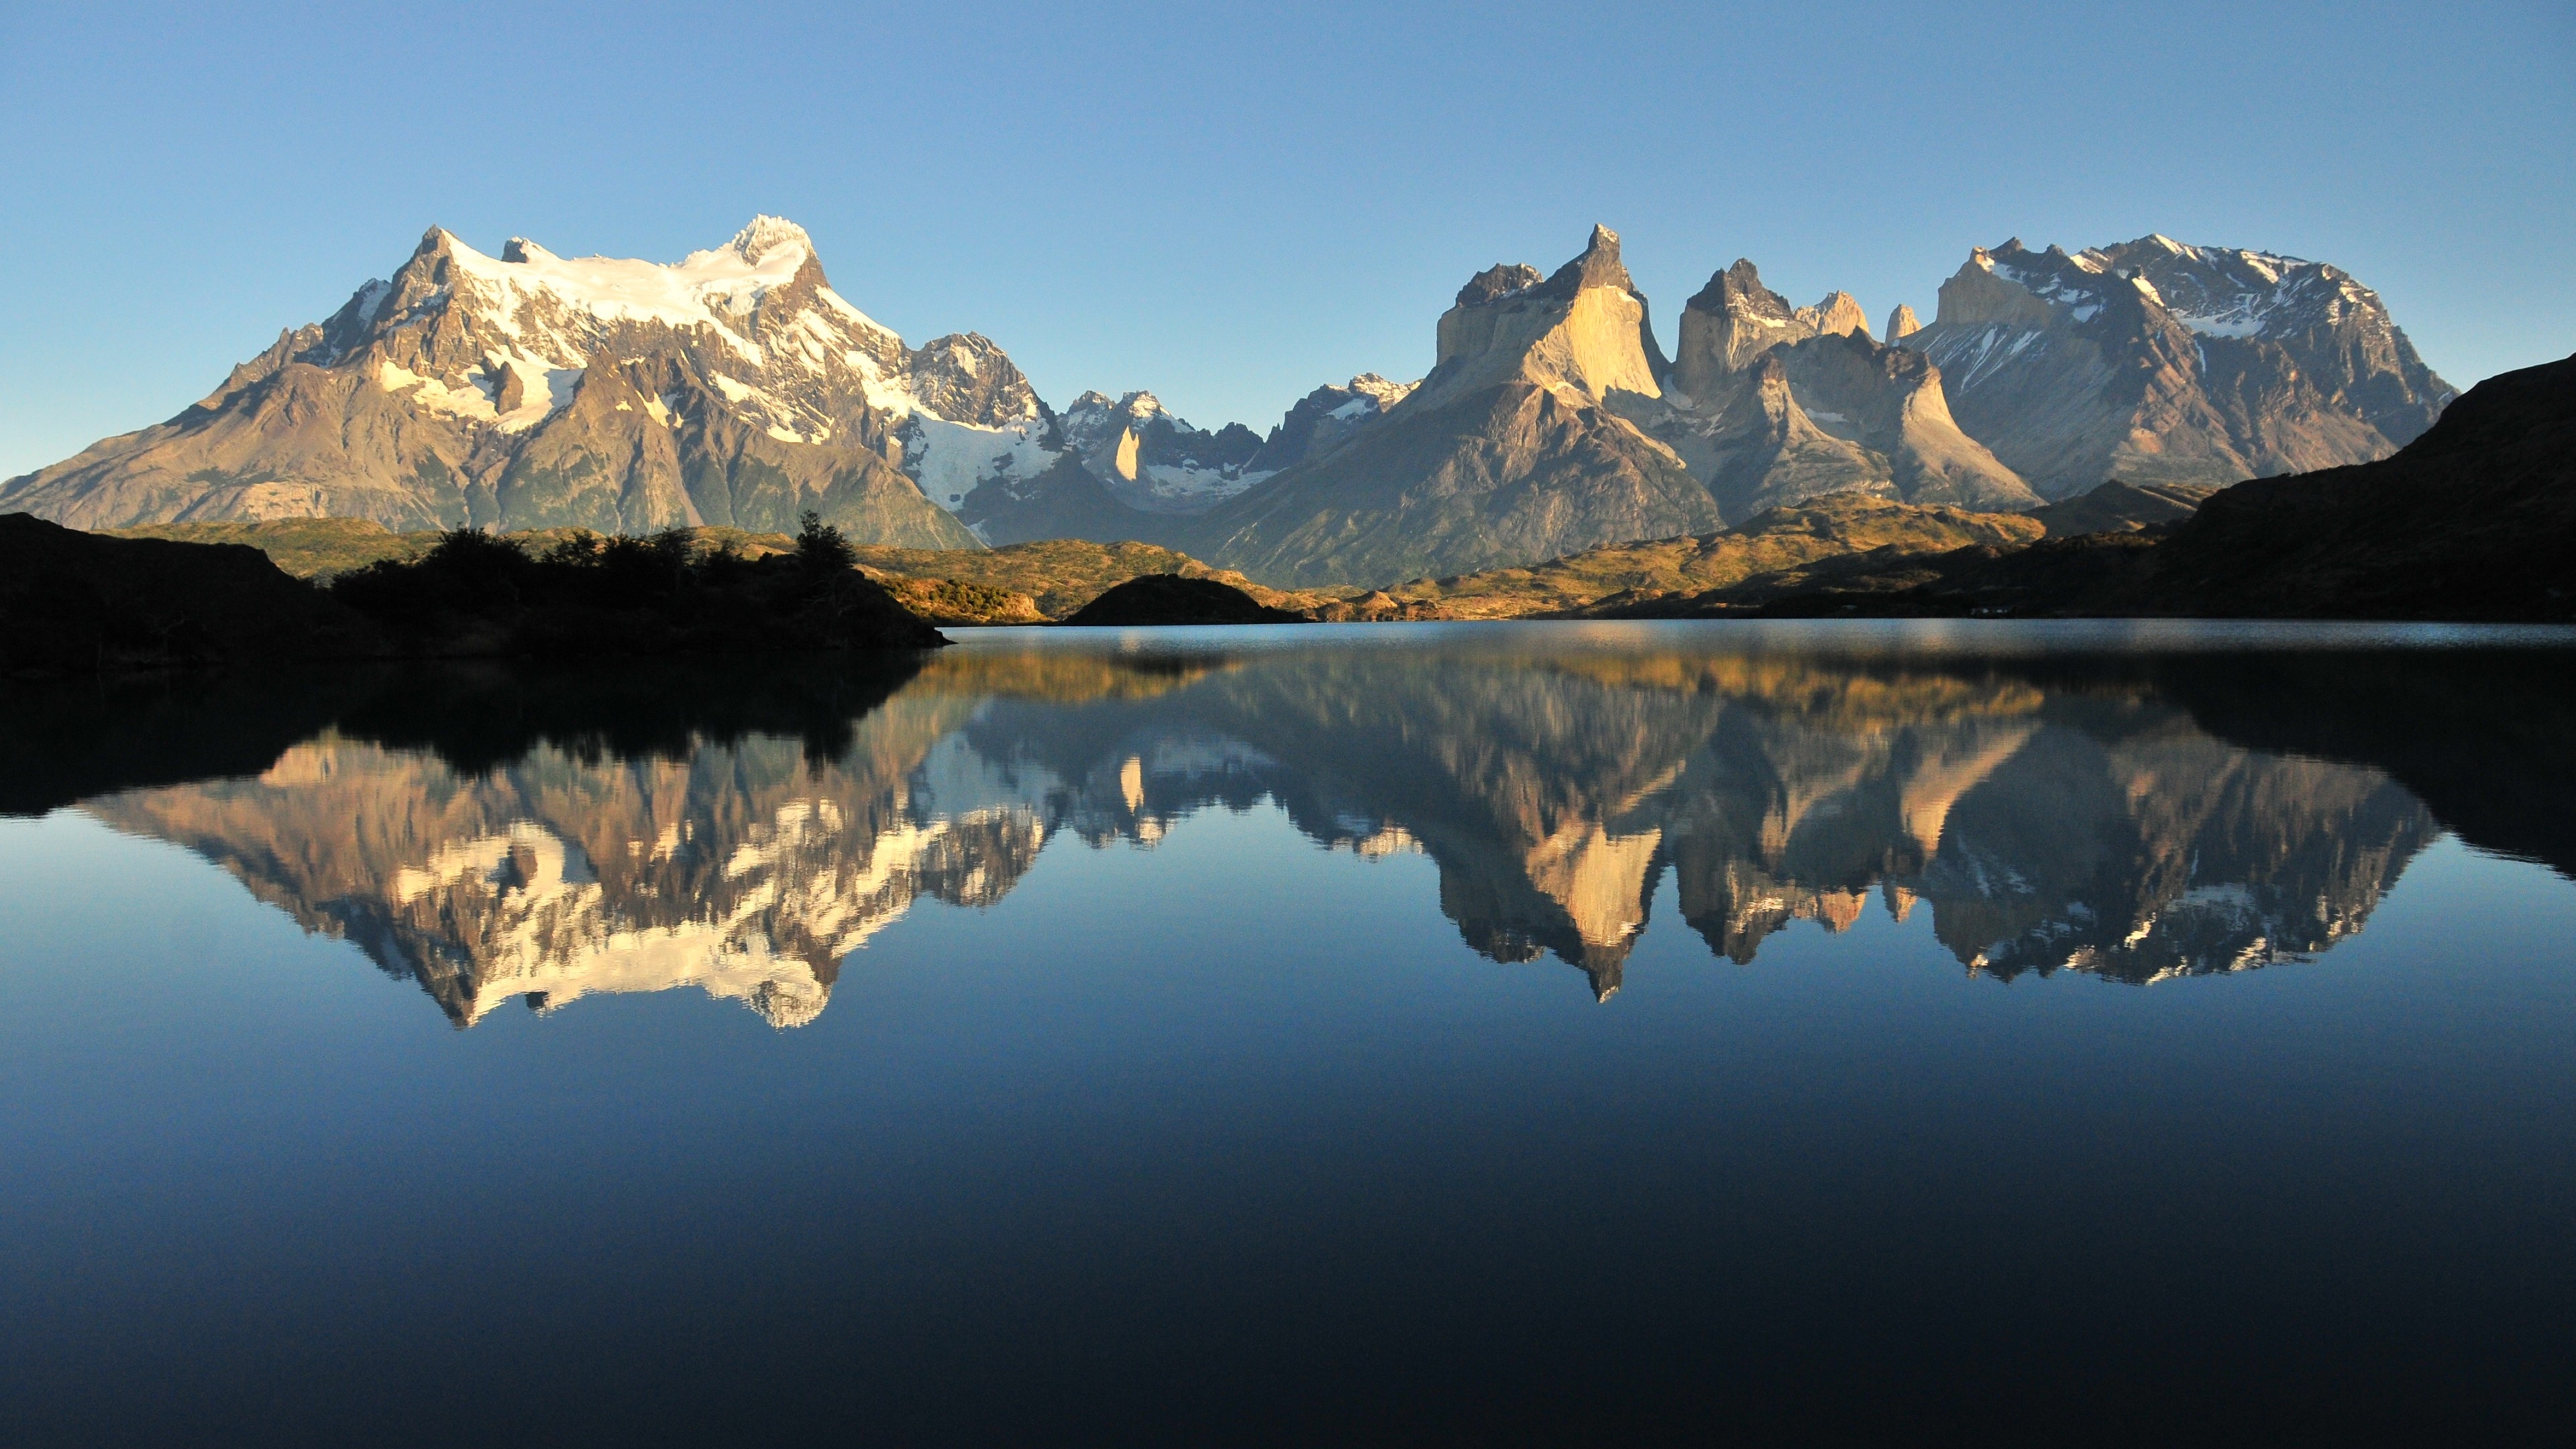 Chile: Lake Gray, Torres del Paine, Mountains, Travel. 3840x2160 4K Wallpaper.